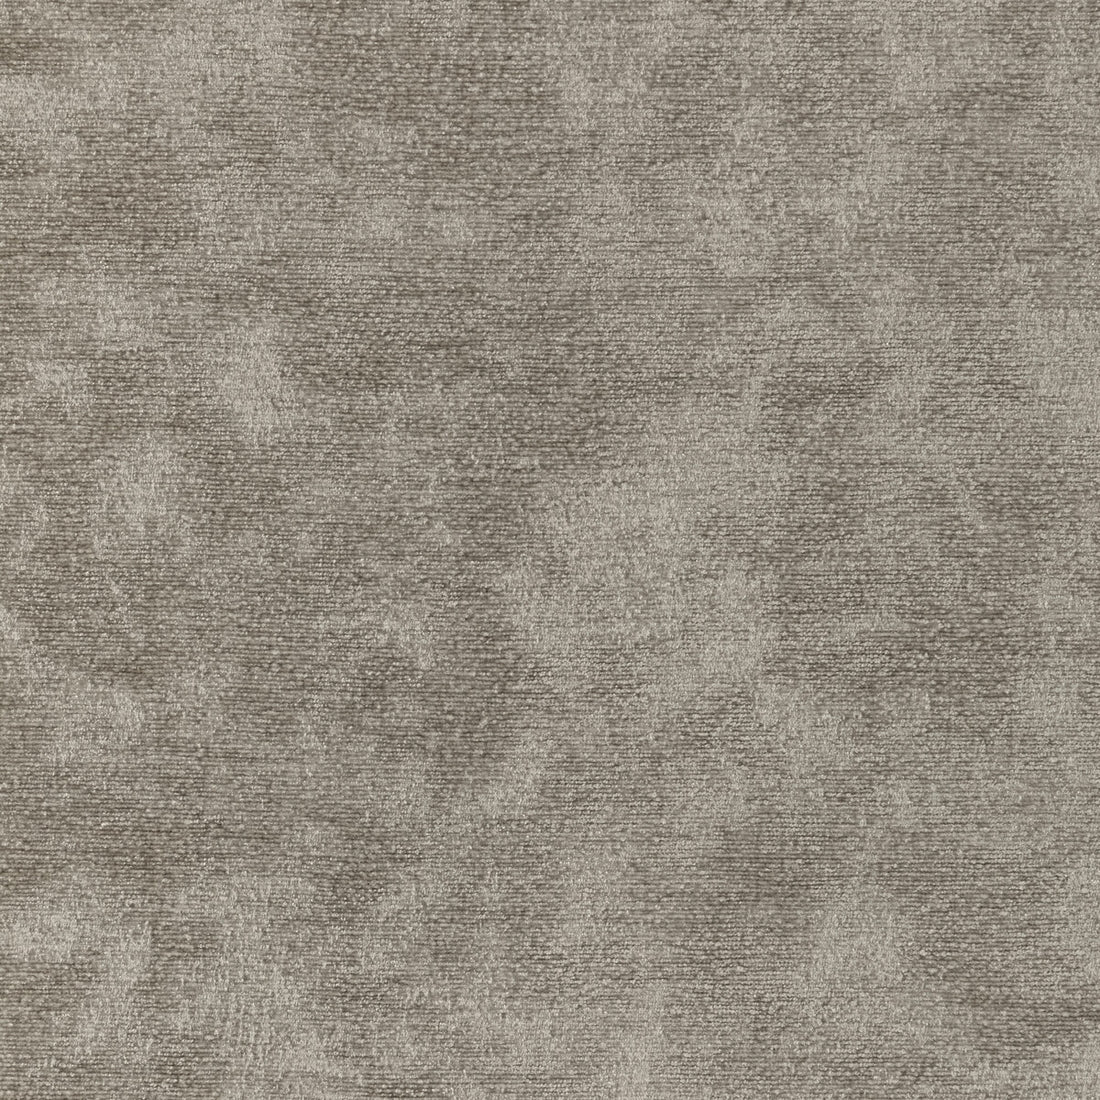 Kravet Smart fabric in 36299-11 color - pattern 36299.11.0 - by Kravet Smart in the Performance Crypton Home collection